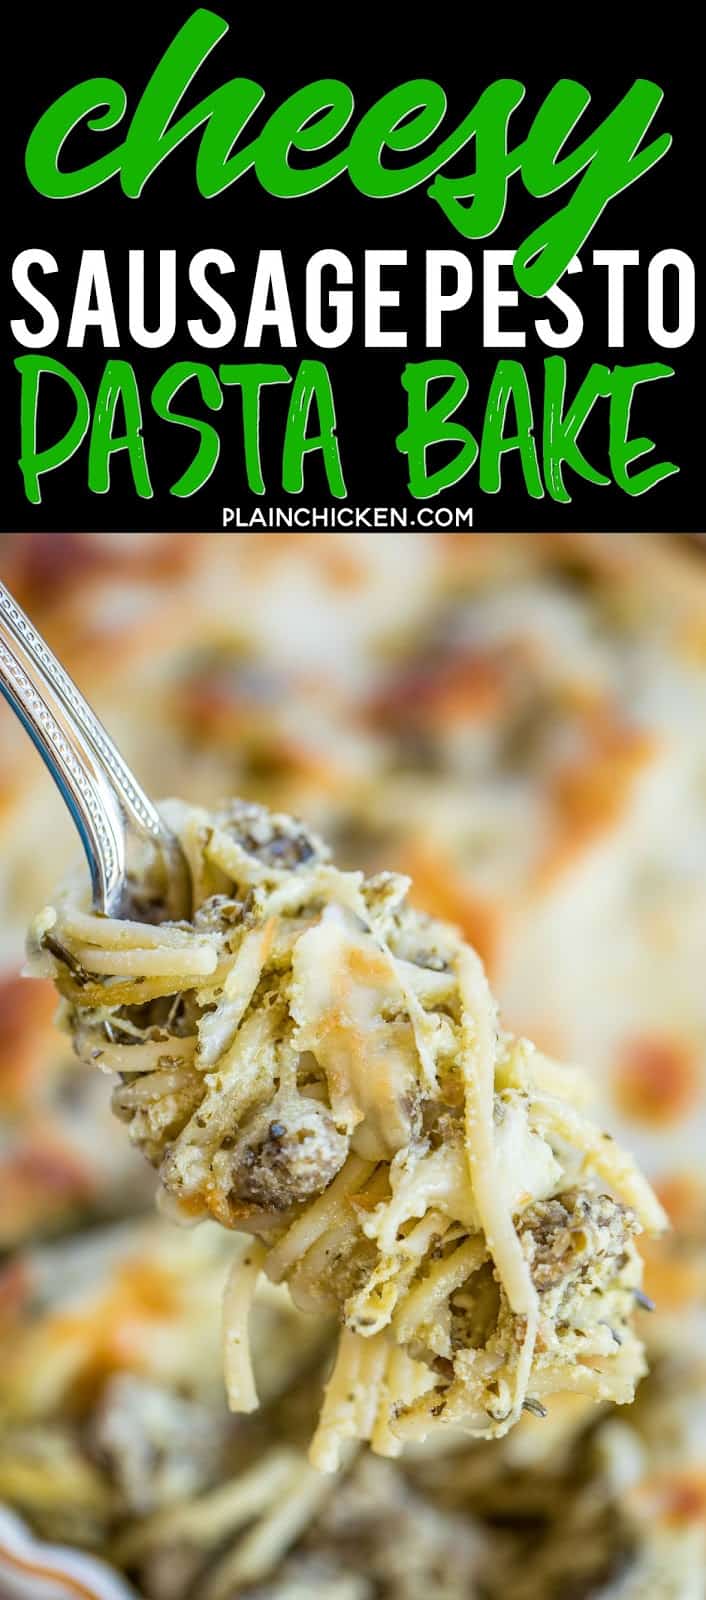 Cheesy Sausage Pesto Pasta Bake - only 6 ingredients! Sausage, spaghetti, pesto, ricotta, mozzarella and parmesan - SO good! Great make ahead pasta casserole recipe - can freeze too! There are never any leftovers. Such a quick and easy casserole recipe!! #pasta #casserole